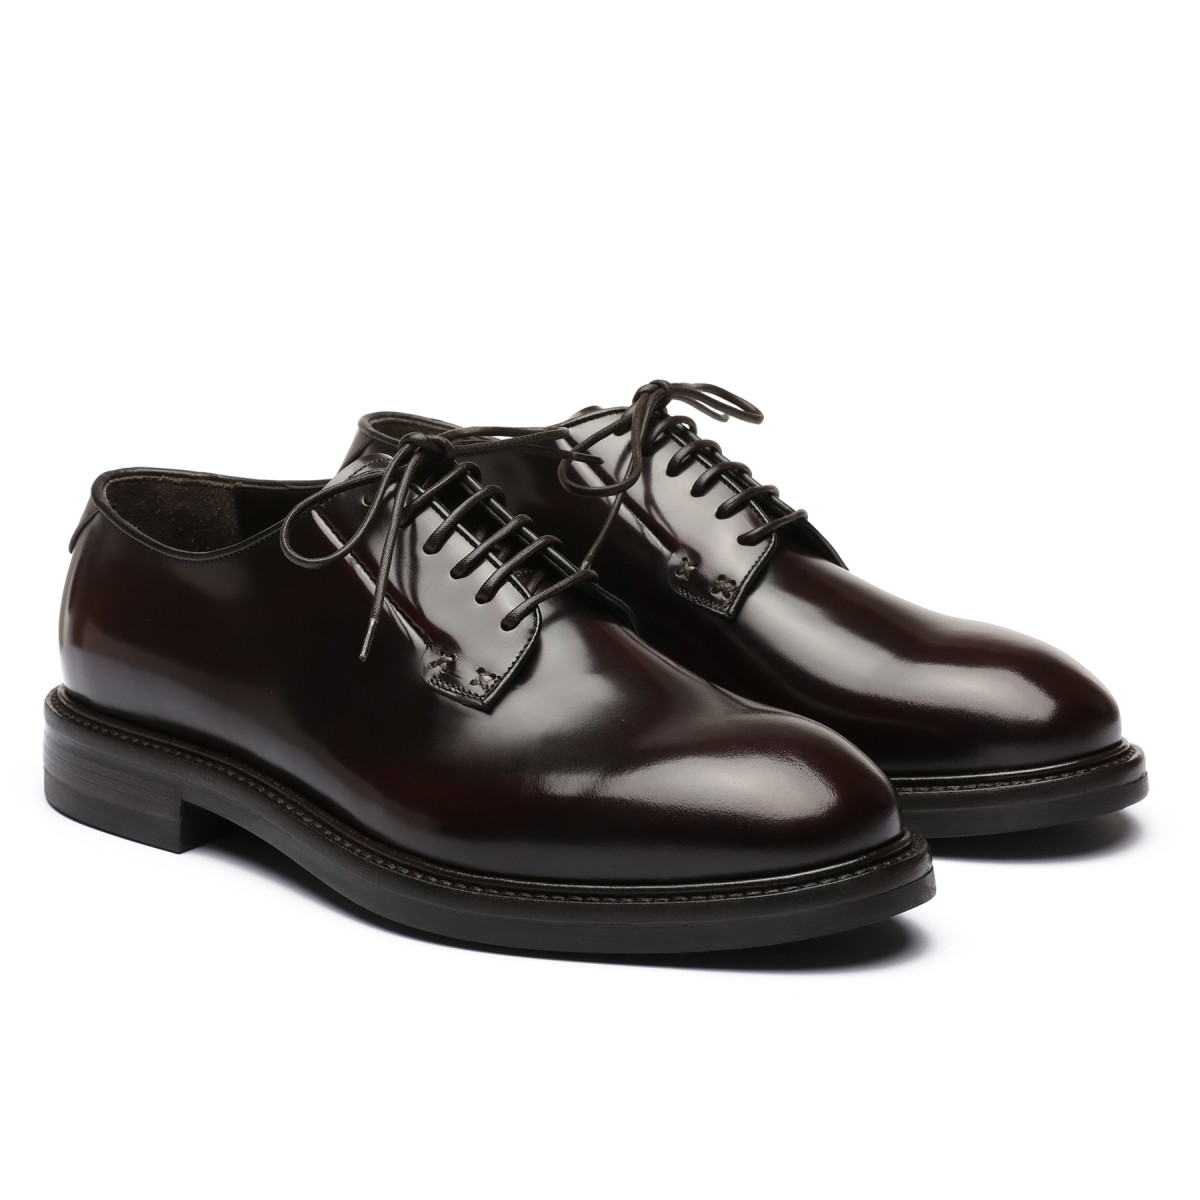 Pascoli dark brown Derby shoes